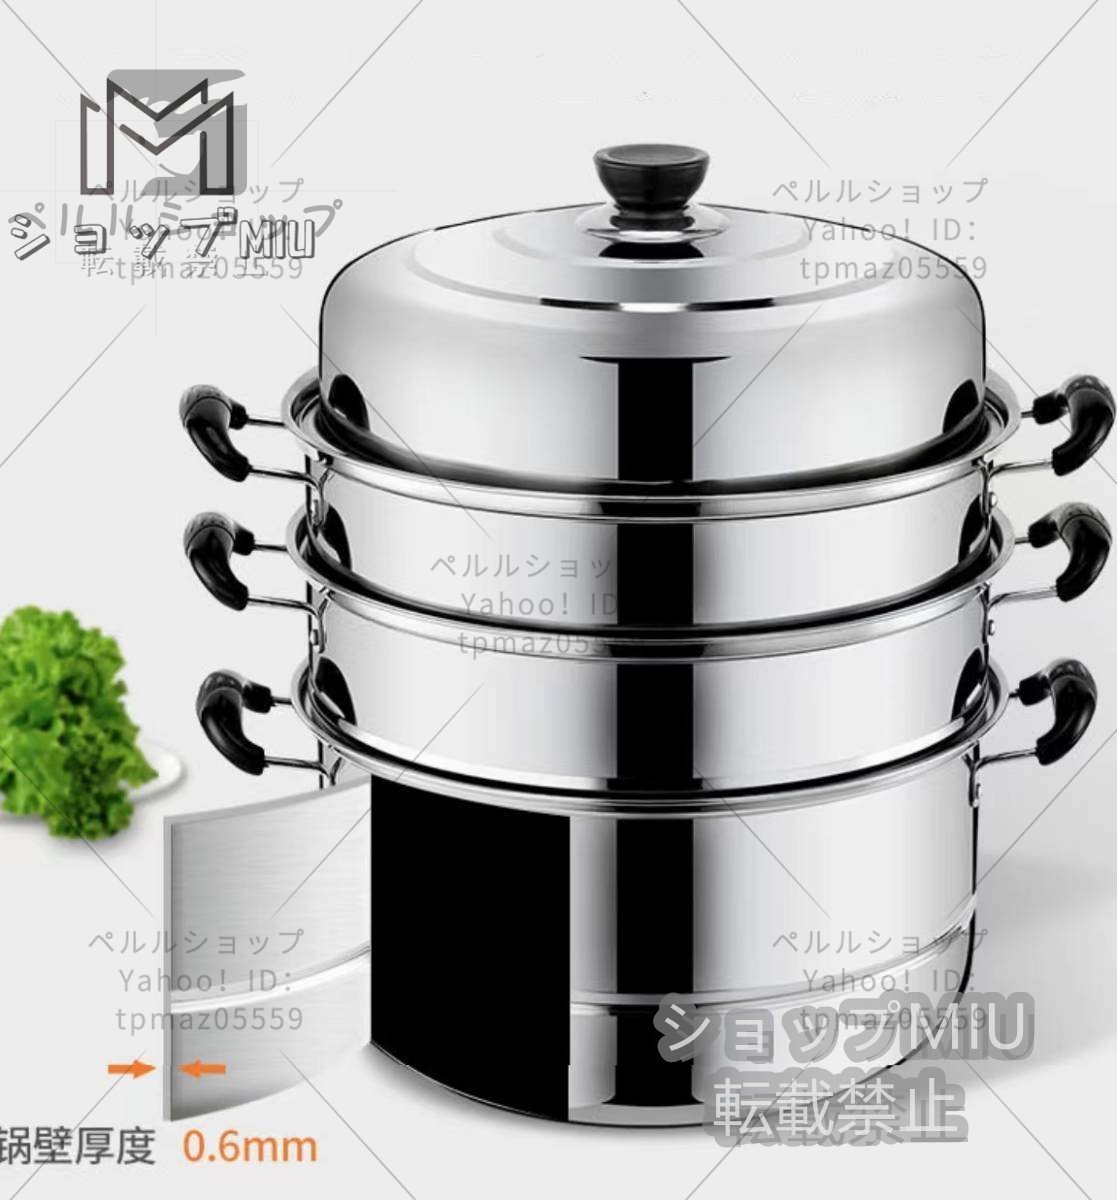  new goods appearance steamer stainless steel 